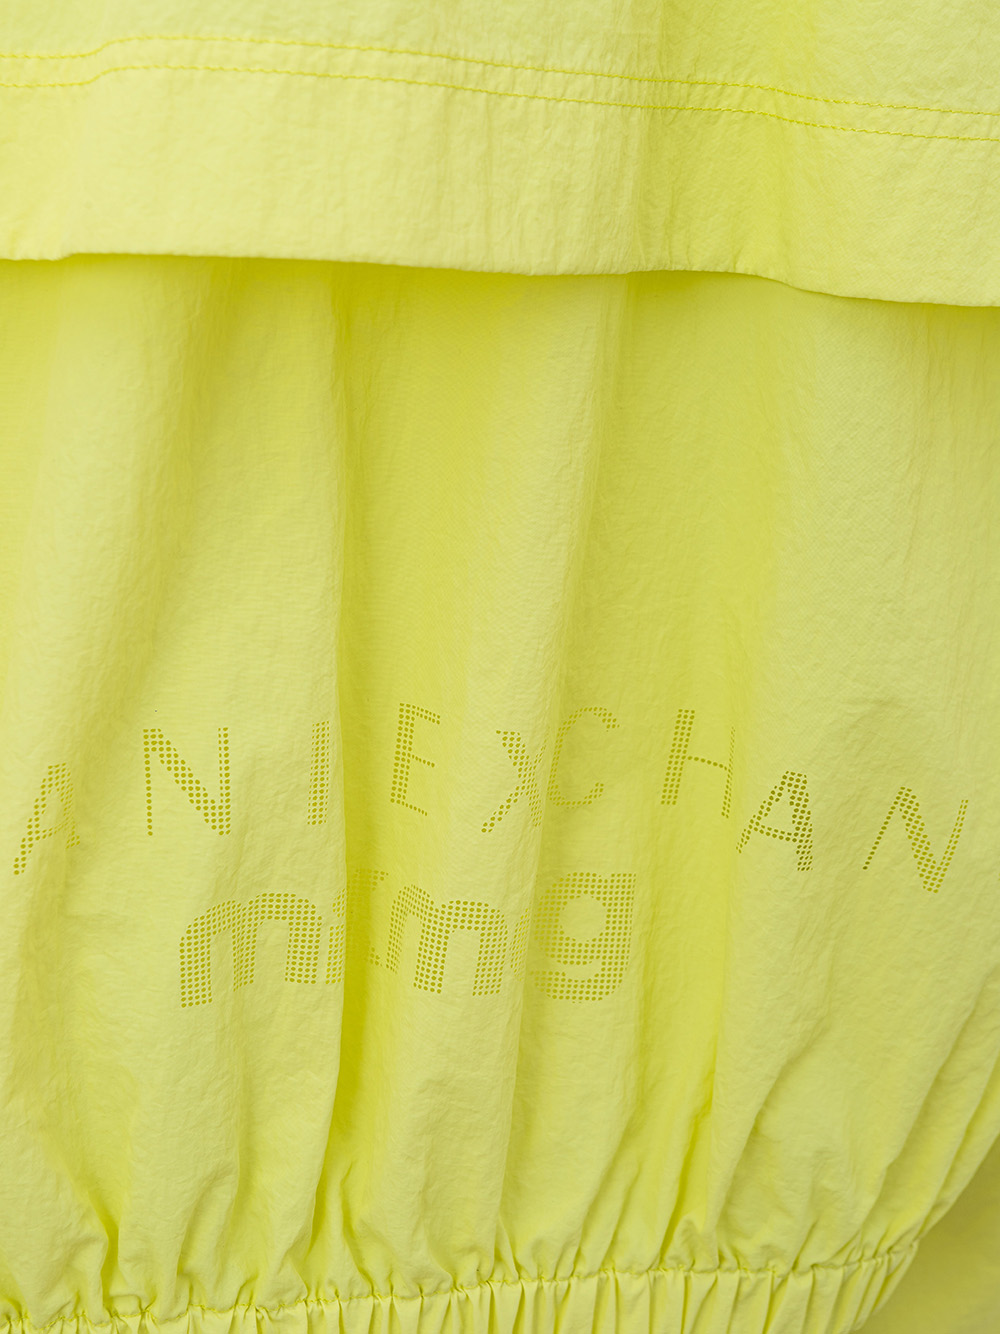 Armani Exchange Yellow Technical Jacket • Fashion Brands Outlet